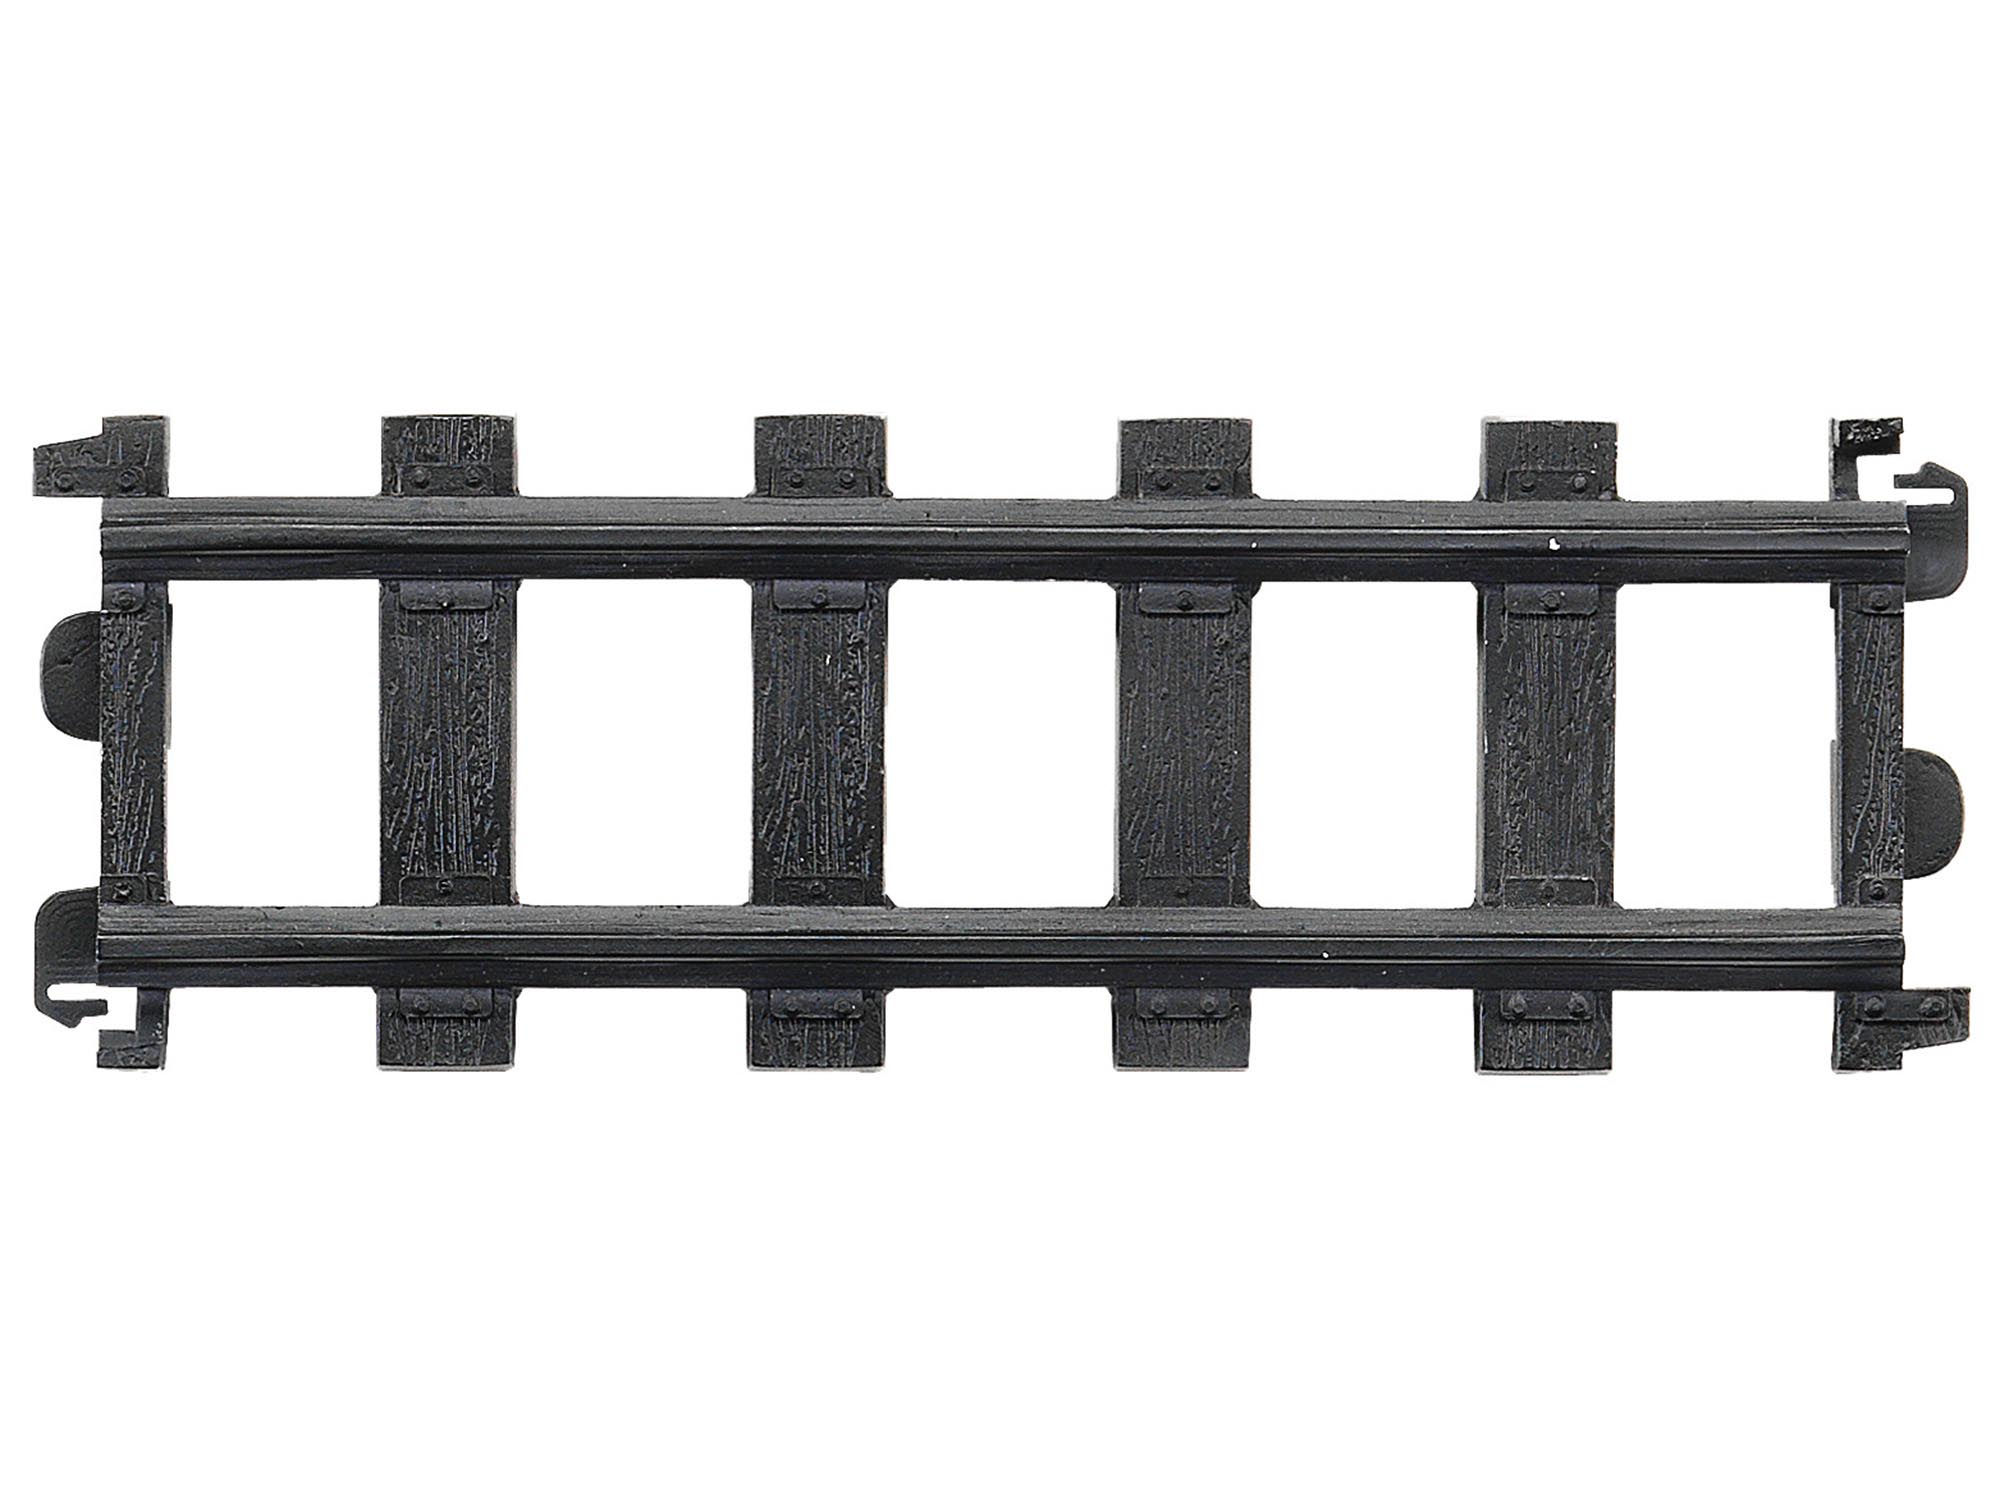 LIONEL G GAUGE STRAIGHT TRACK SECTION battery operated train 7-11039 BULK TRACK Lionel Trains